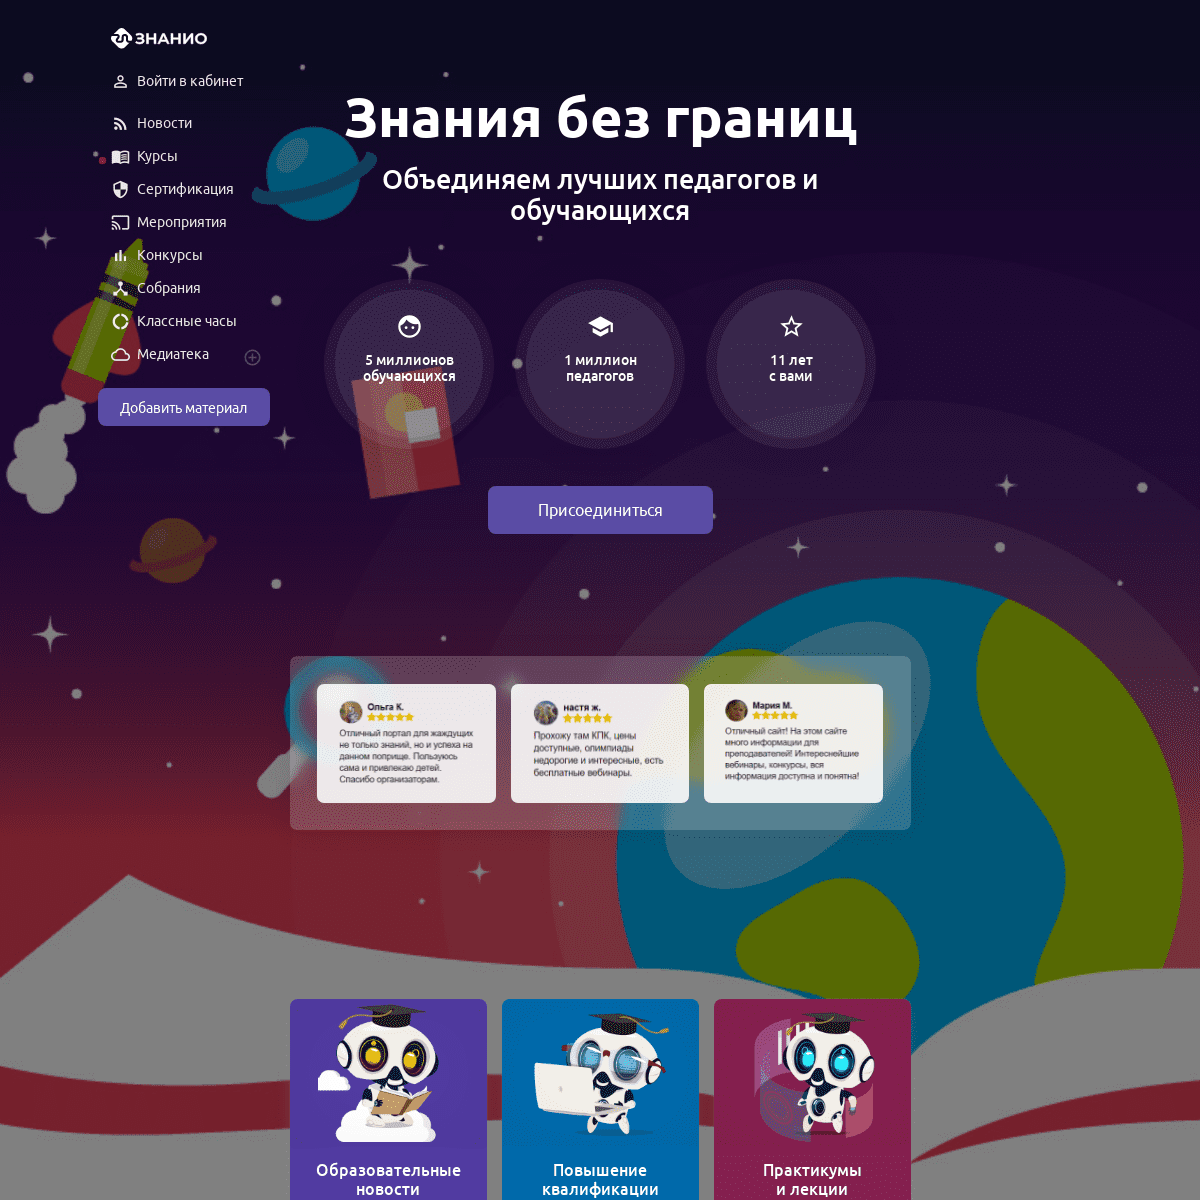 A complete backup of https://znanio.ru